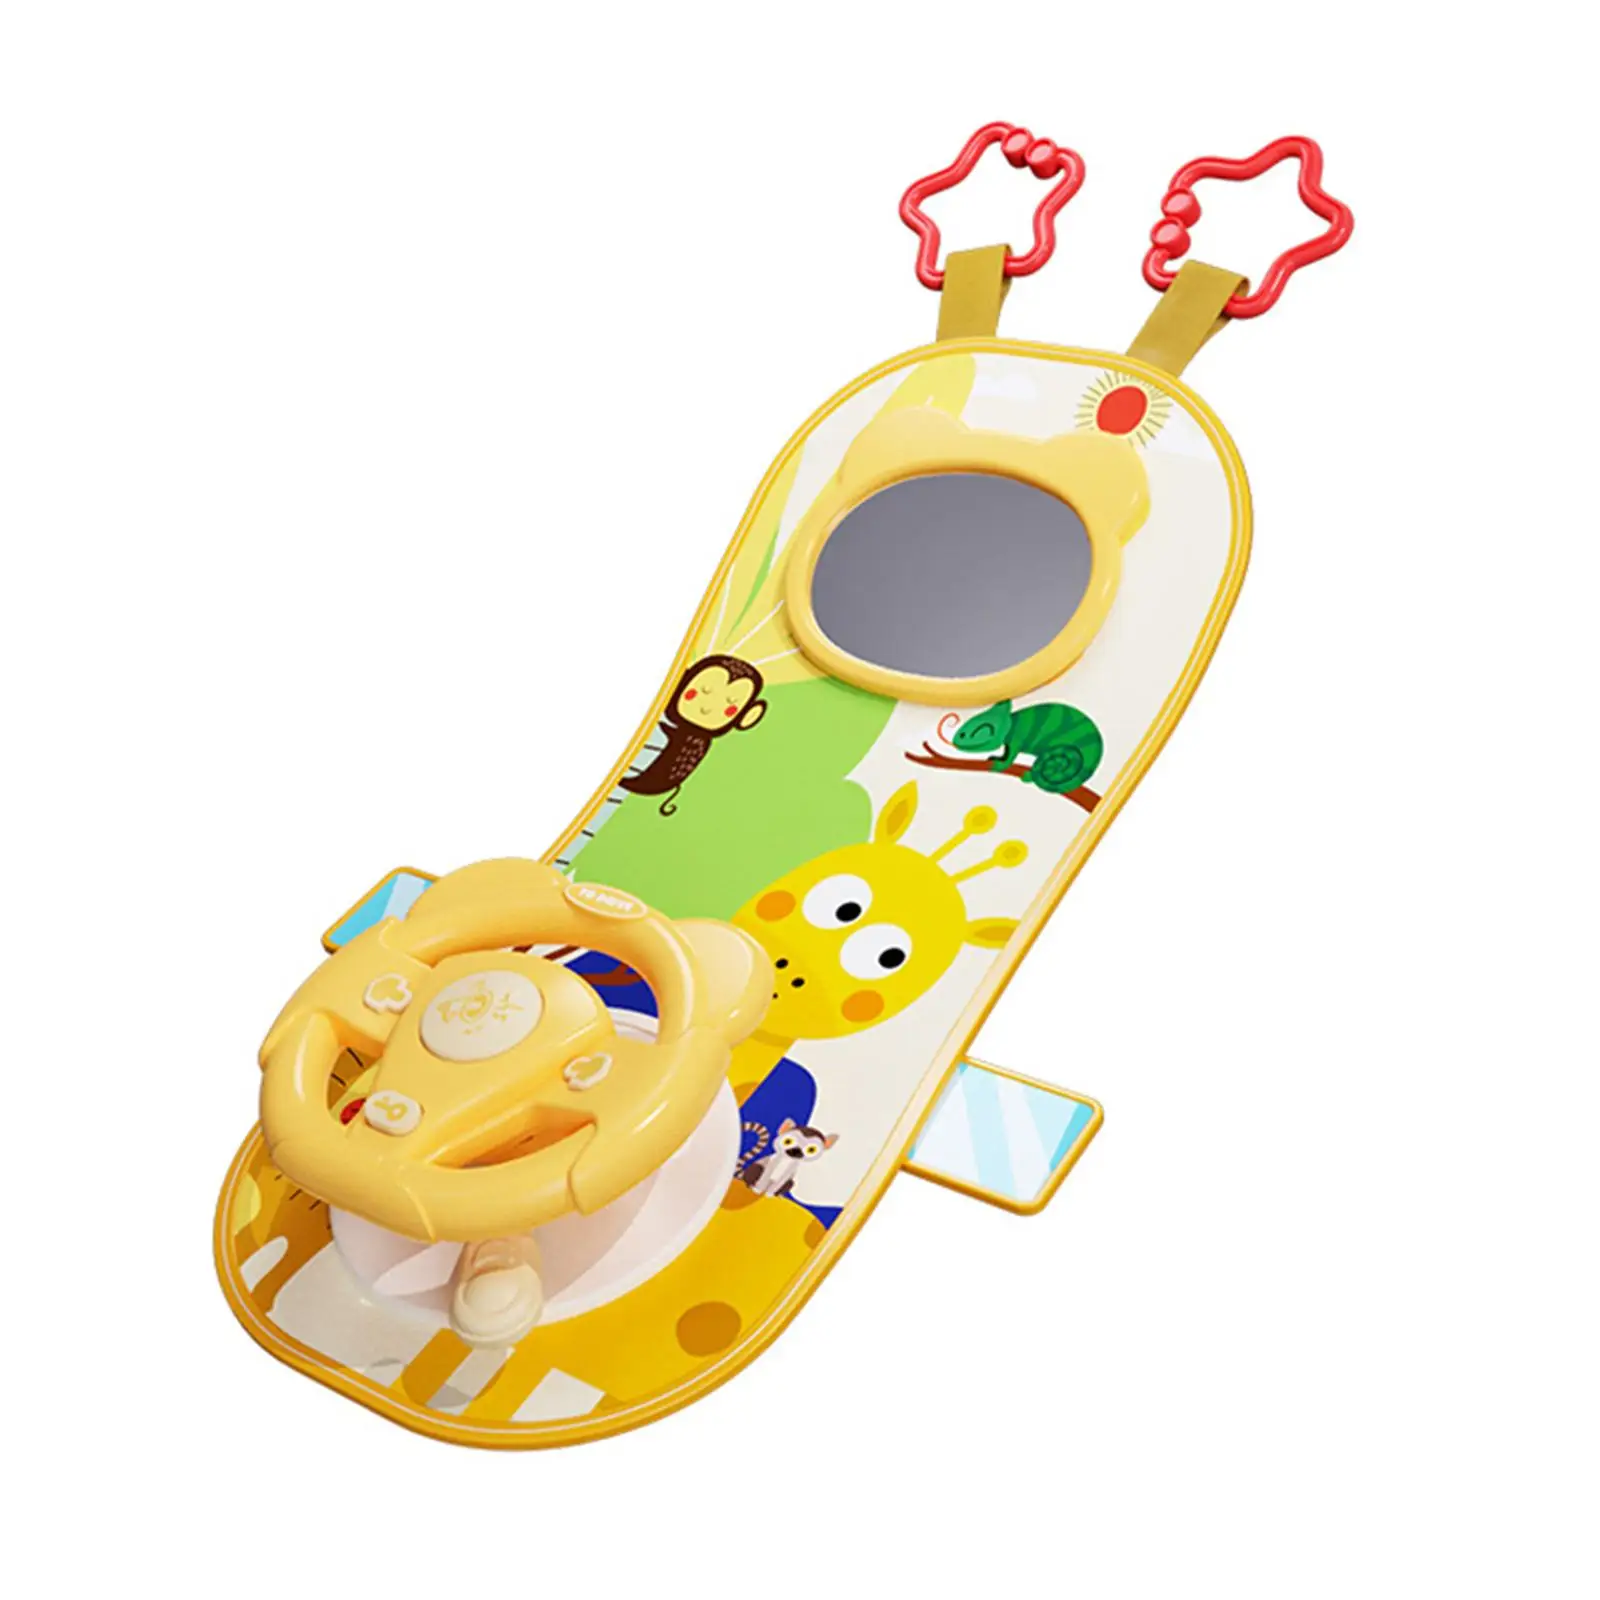 Car Toy with Mirror Car Toy Pretend Play Toy with Music Simulation with Mirror